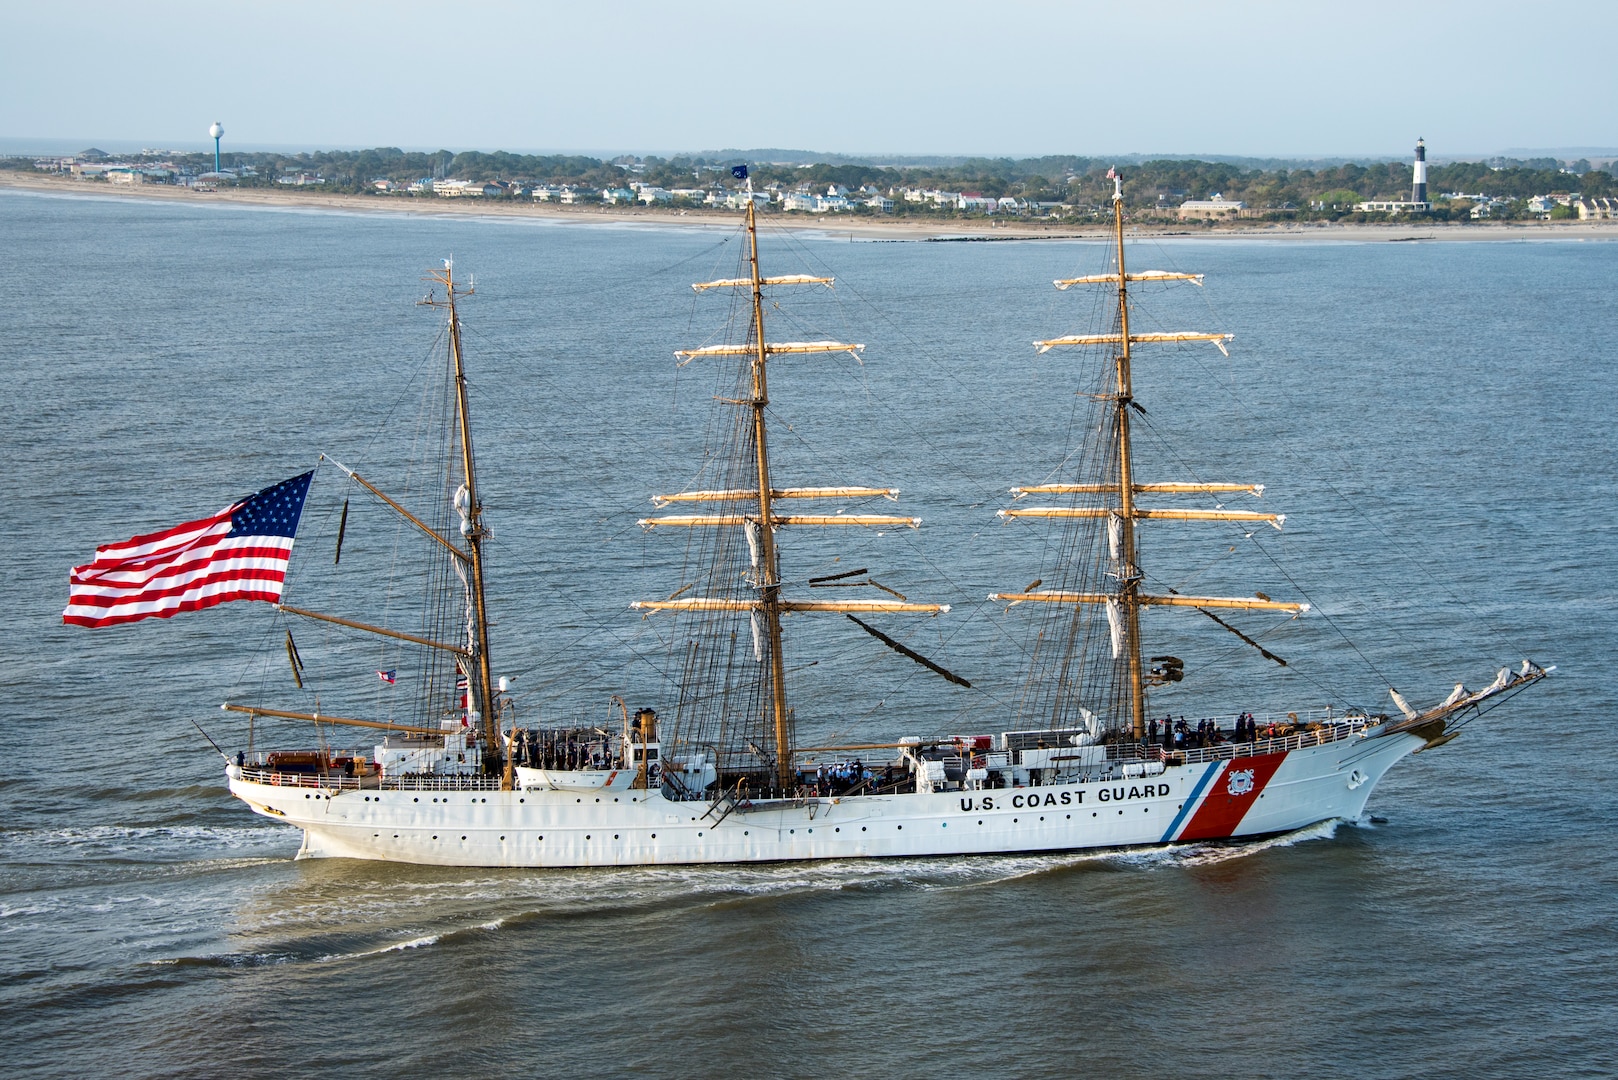 oast Guard Cutter Eagle transits down the Savannah River towards Savannah, Georgia, Mar. 15, 2019, in front of the Tybee Island Lighthouse. The Eagle arrived in Savannah for St. Patrick’s Day weekend with over 100 guests on board.